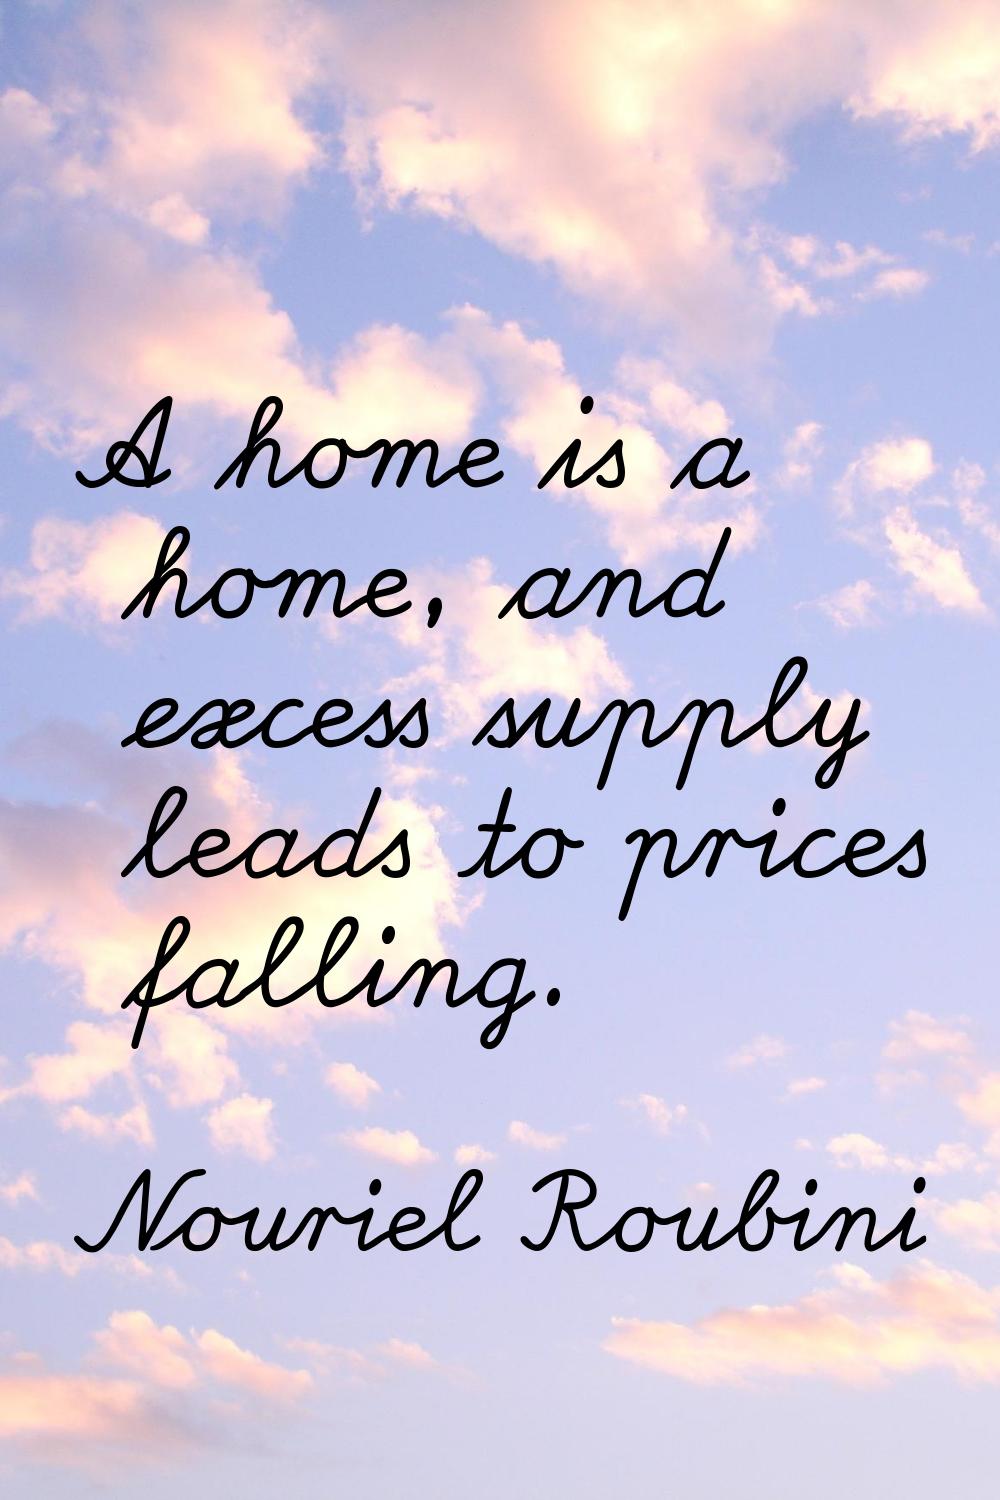 A home is a home, and excess supply leads to prices falling.